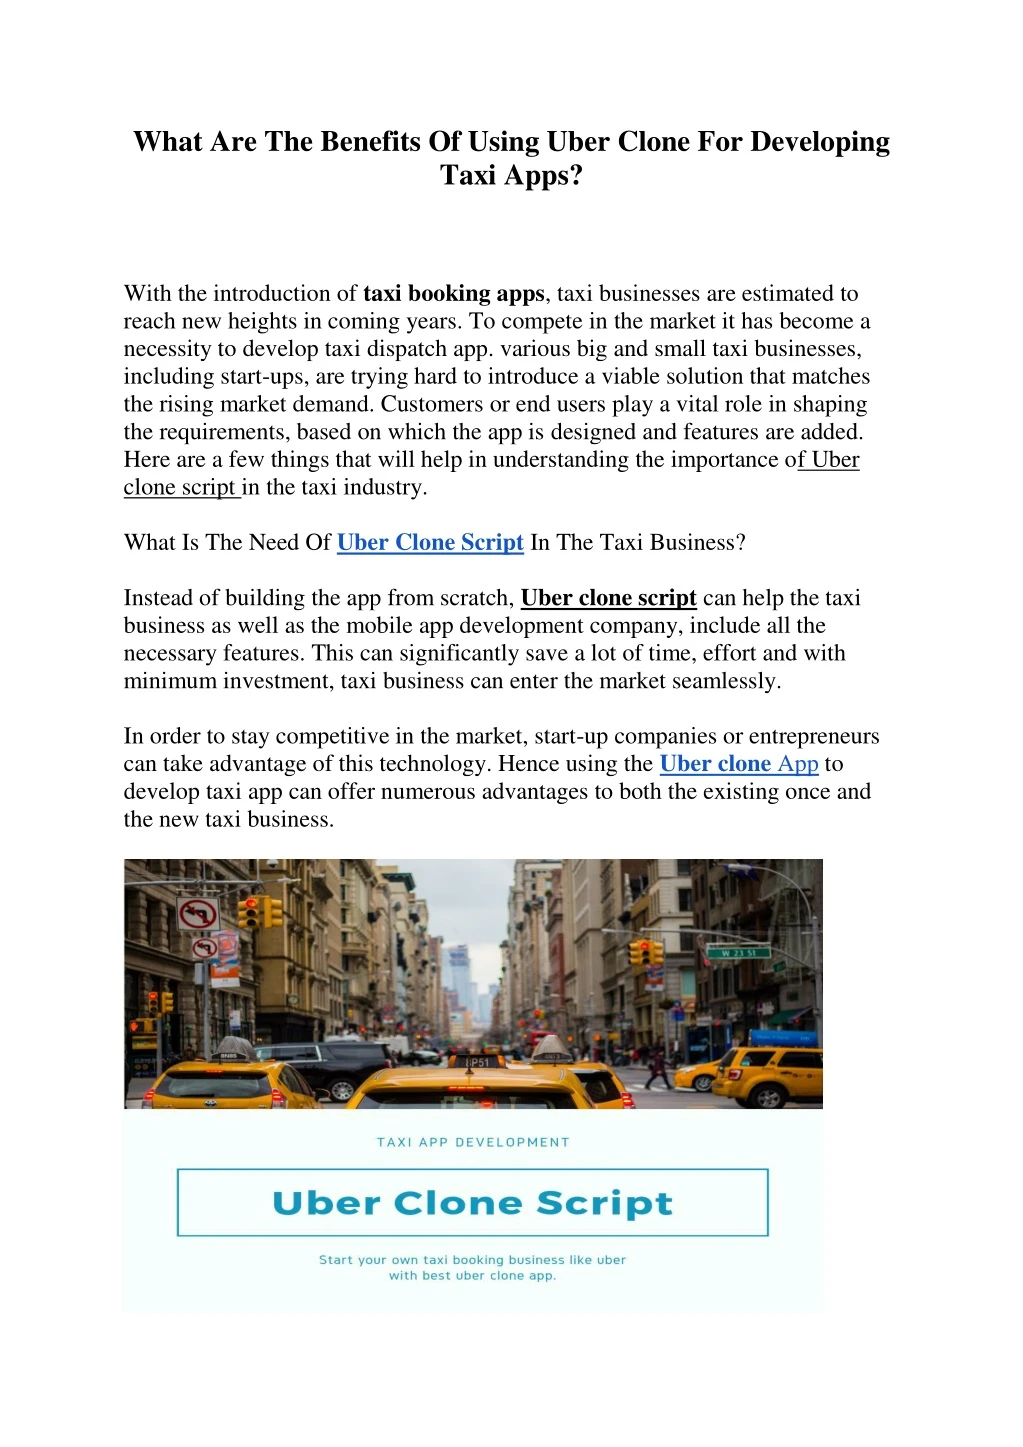 what are the benefits of using uber clone